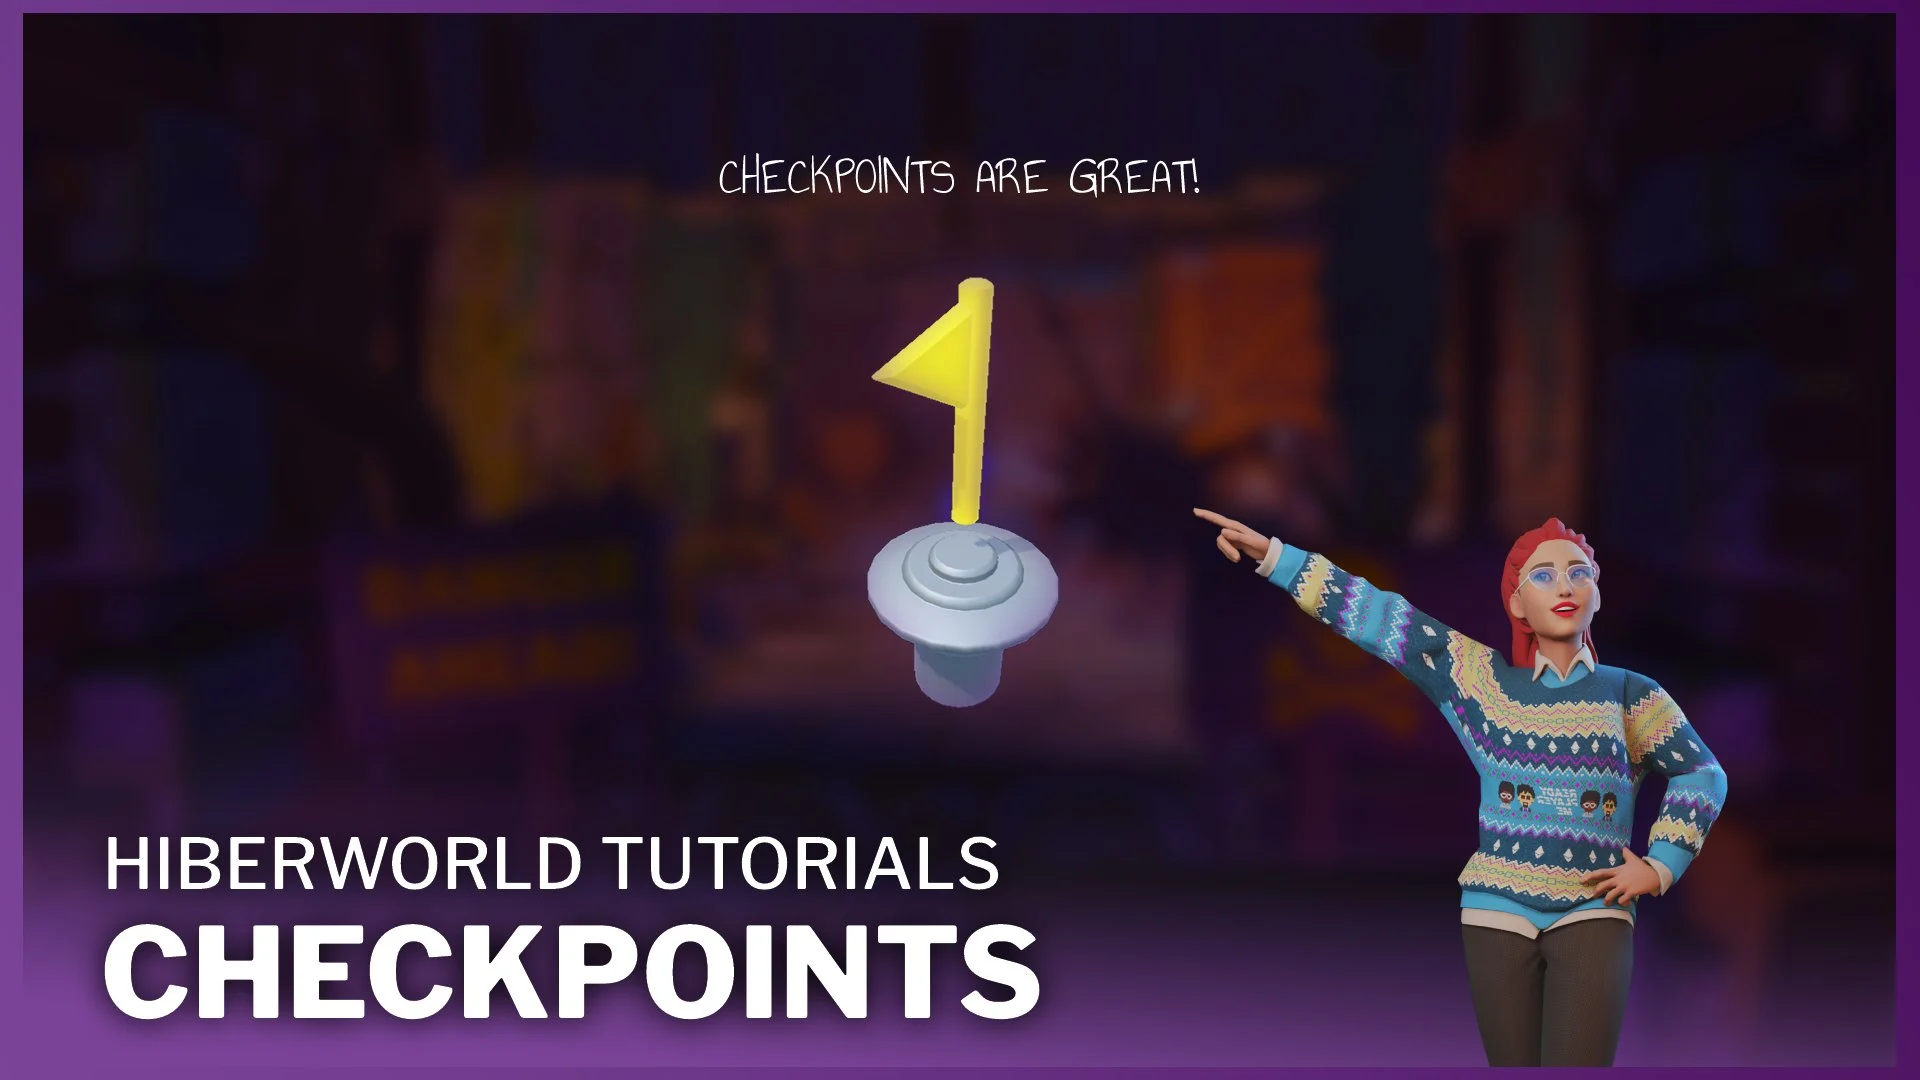 How to use Checkpoints